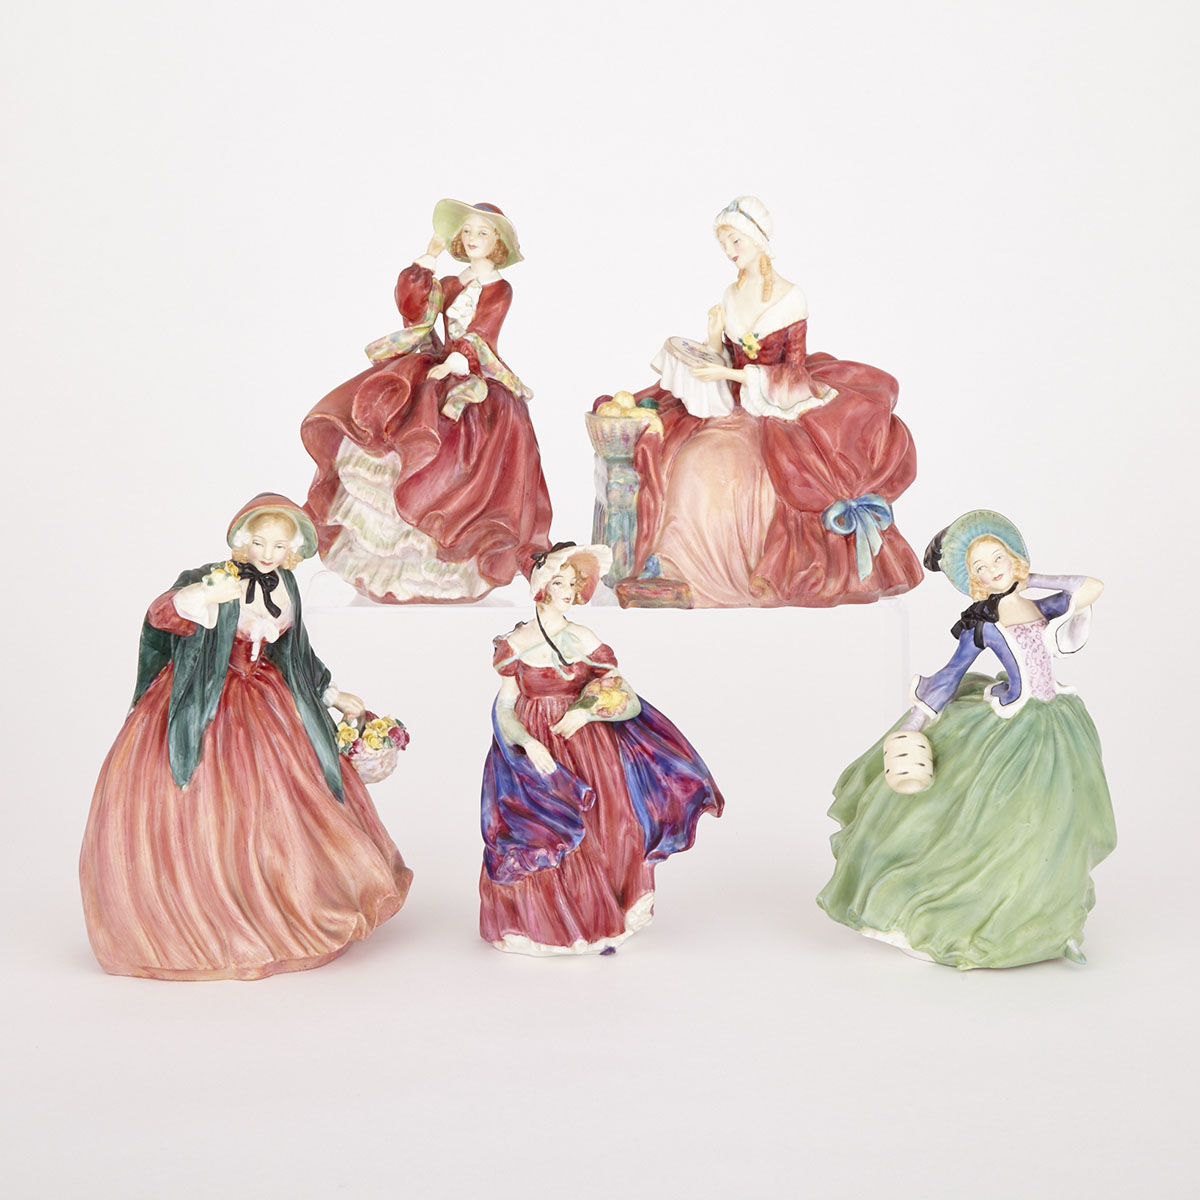 Group of Five Royal Doulton Figurines, 20th century